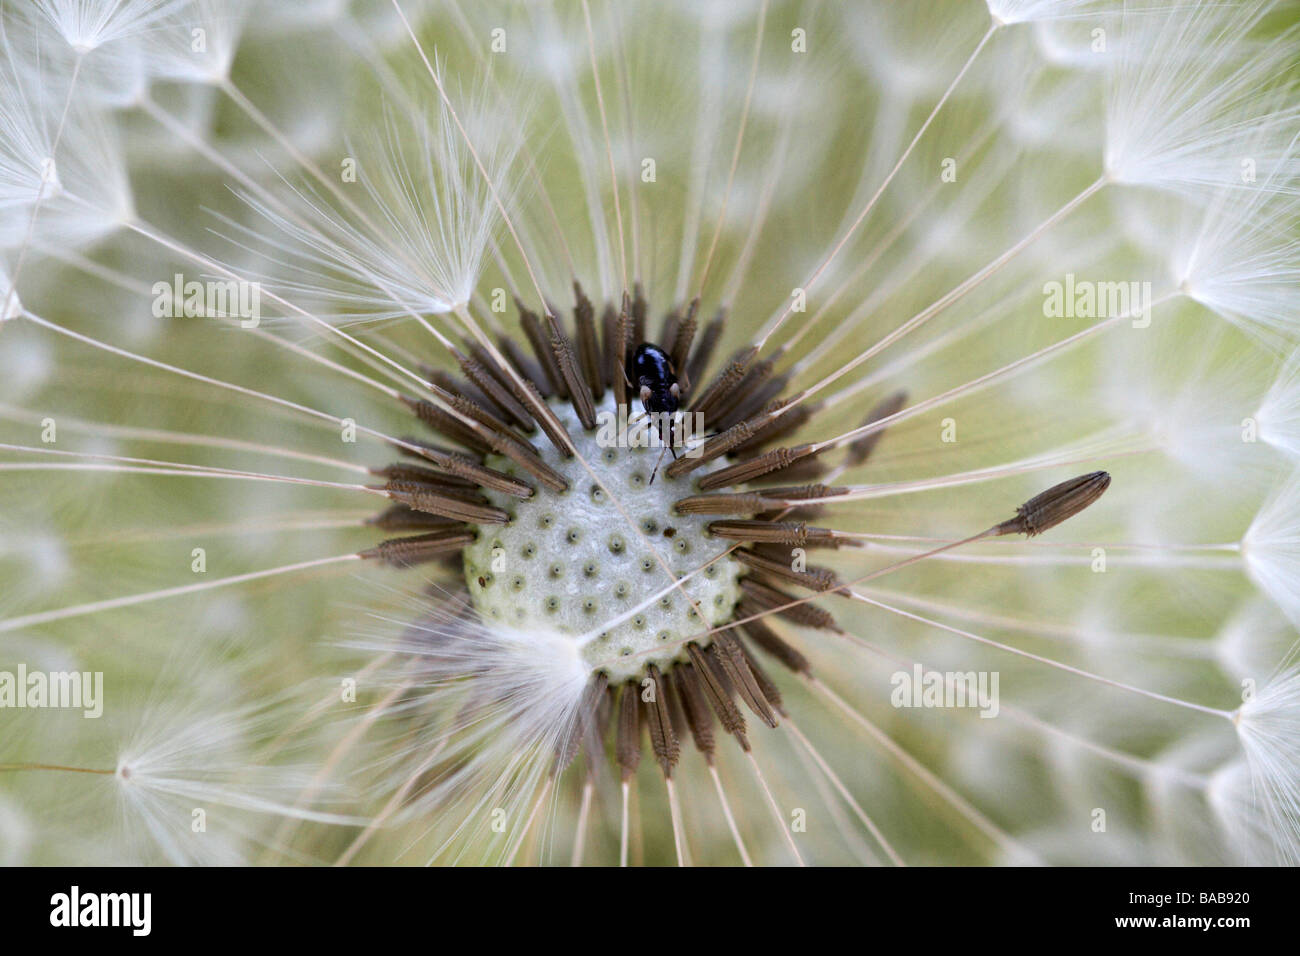 Small insect in dandelion seeds Stock Photo